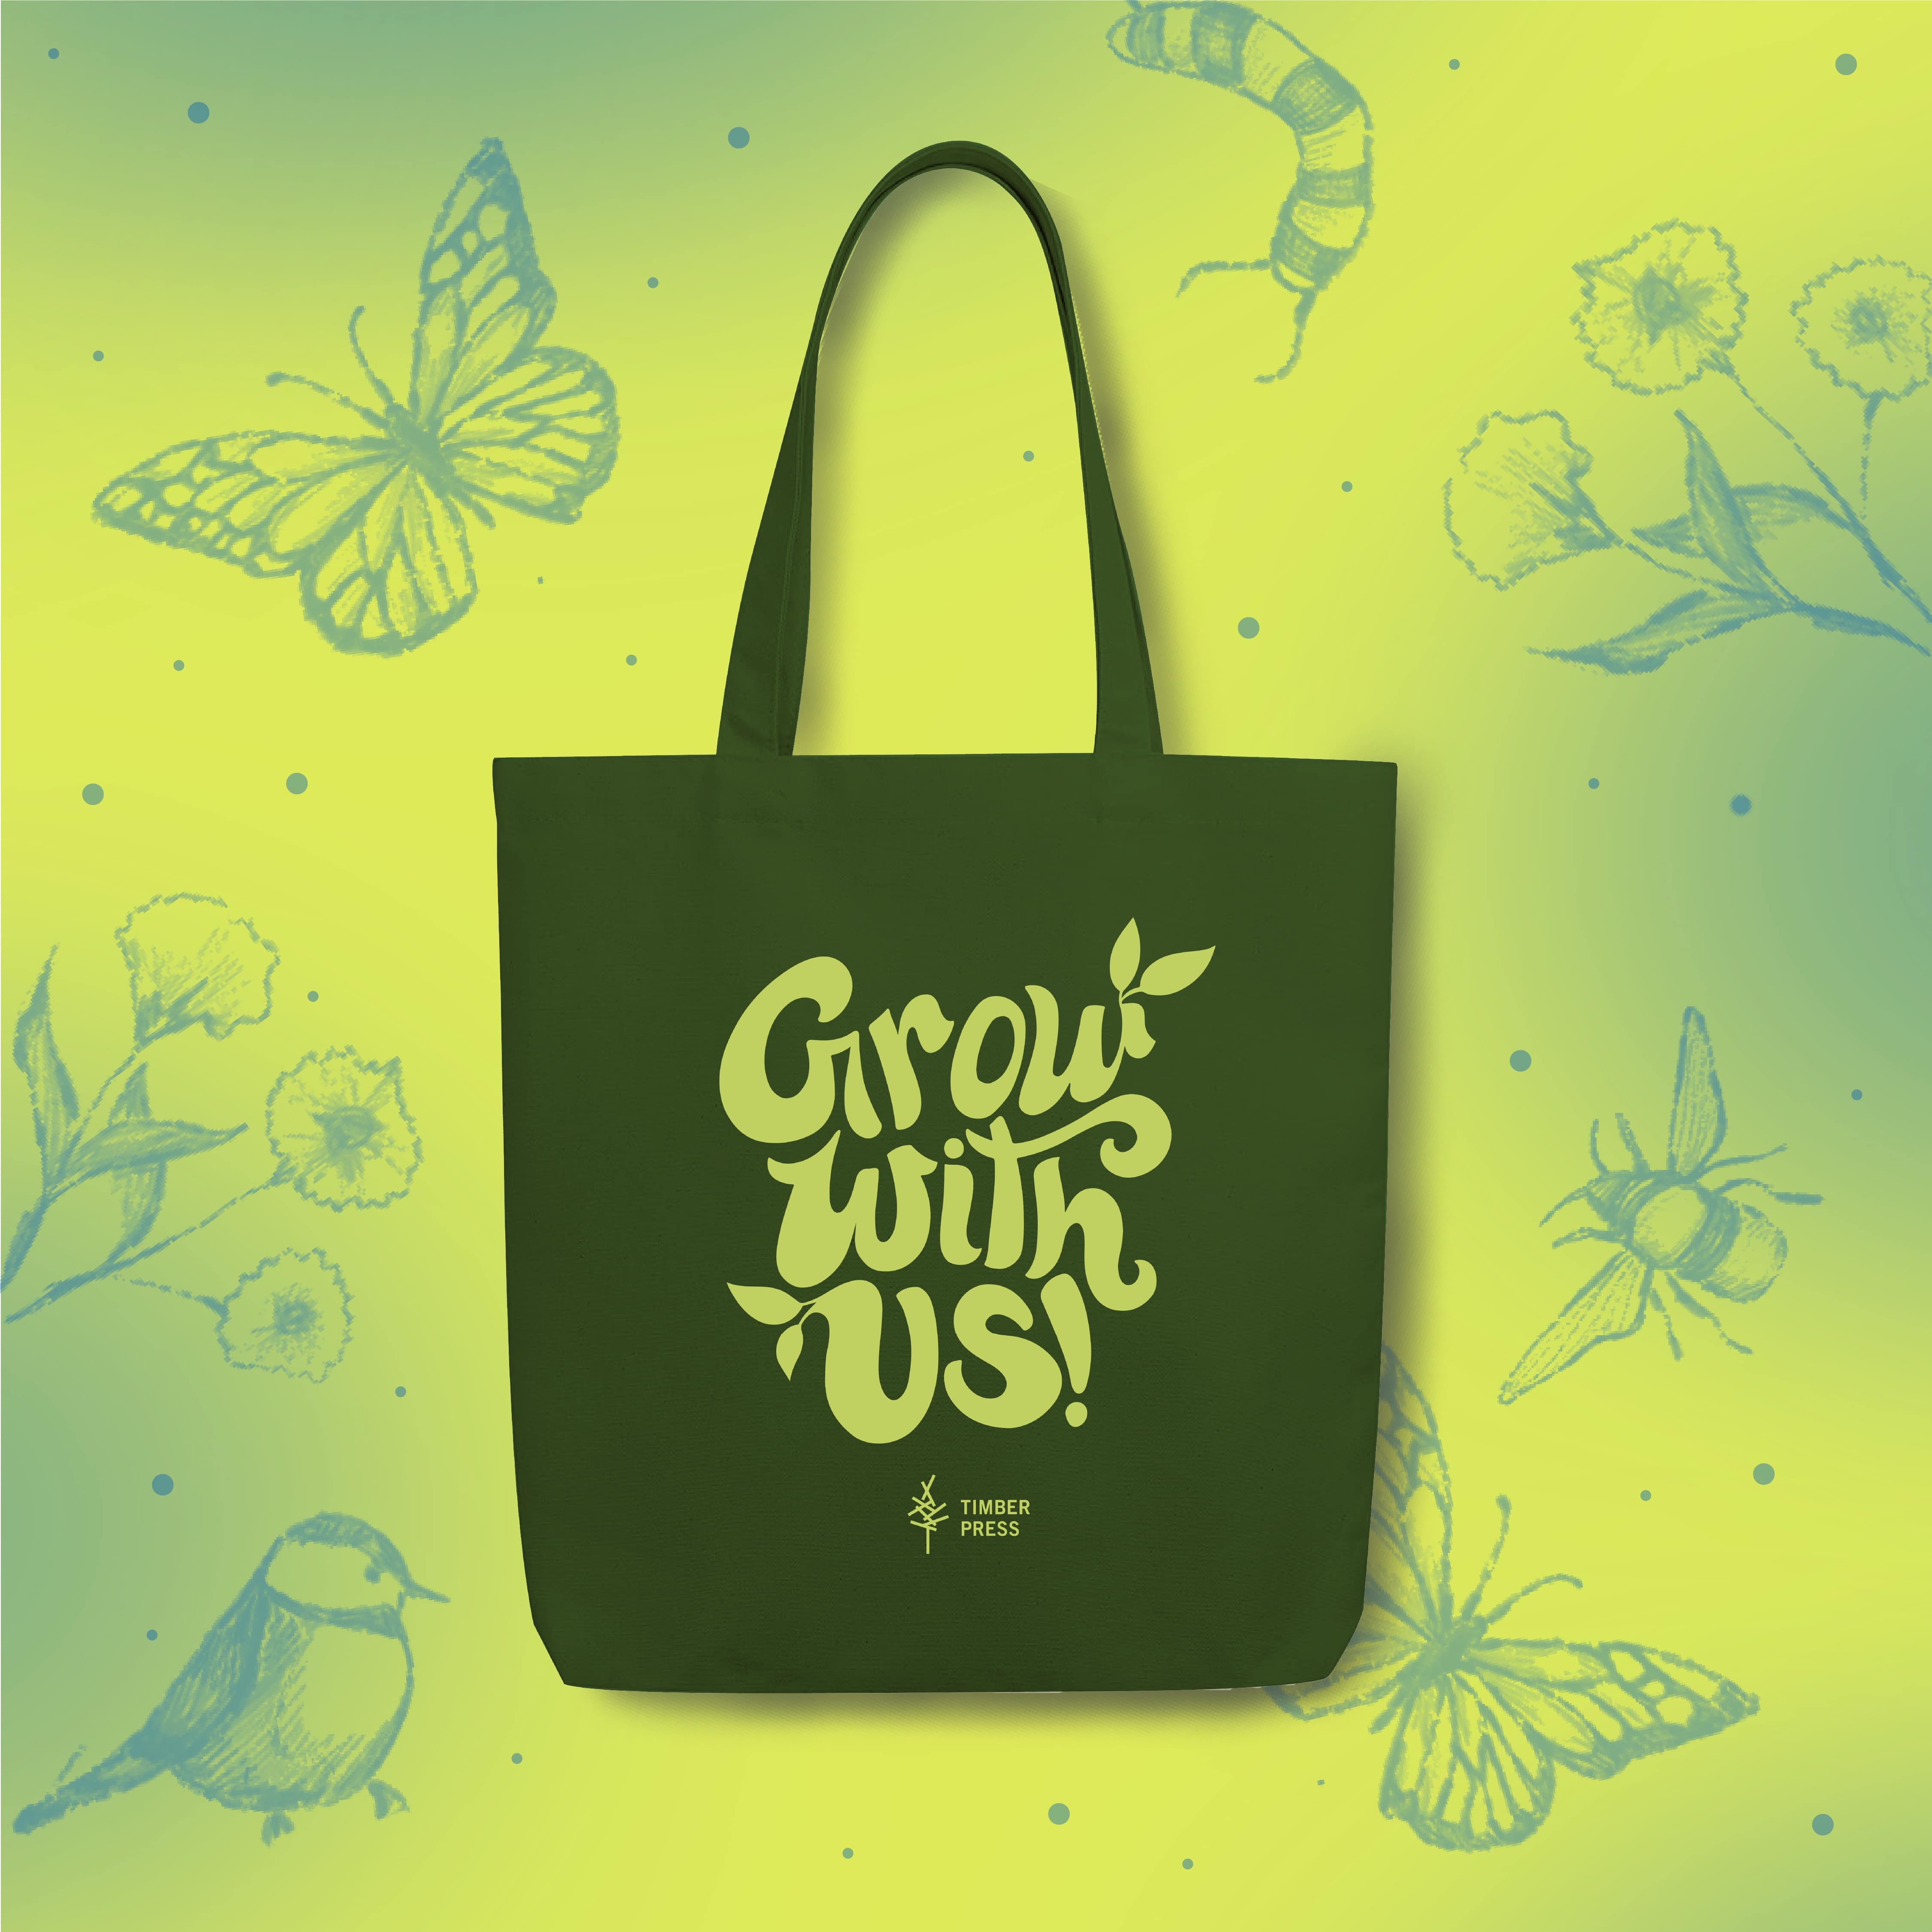 Timber Press green tote bag "Grow with Us!"